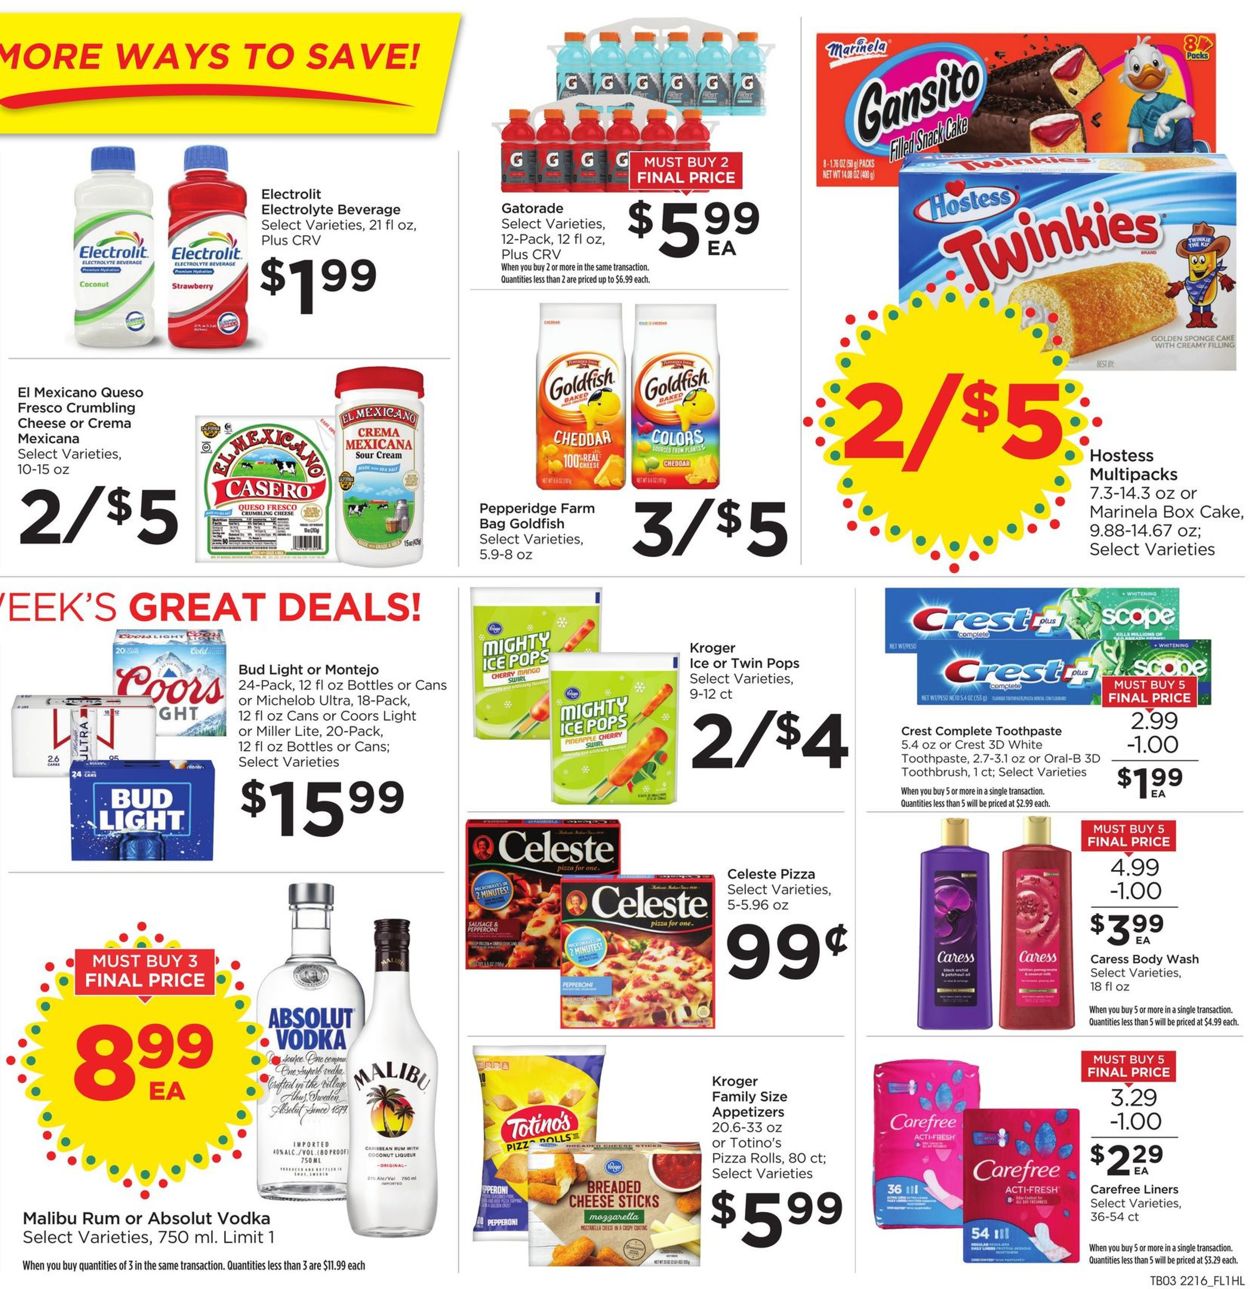 Catalogue Food 4 Less from 05/18/2022